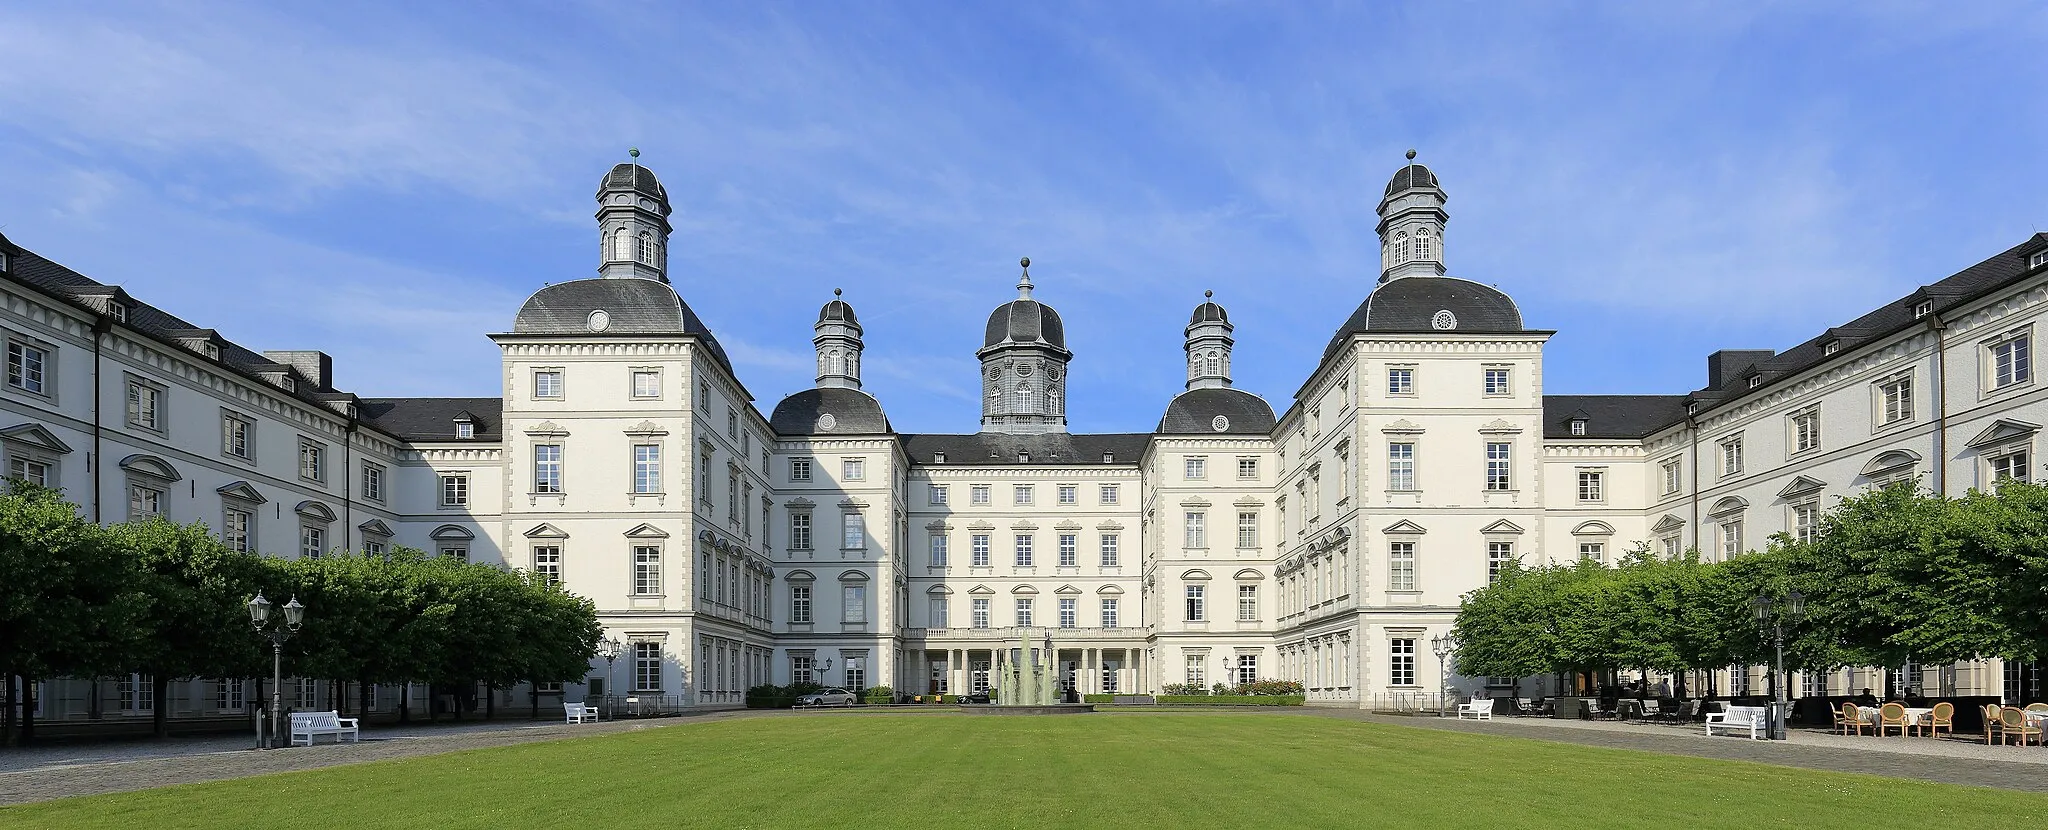 Photo showing: Neues Schloss Bensberg, Bergisch Gladbach, NRW, Germany, built from 1703-1711, now a palace hotel.